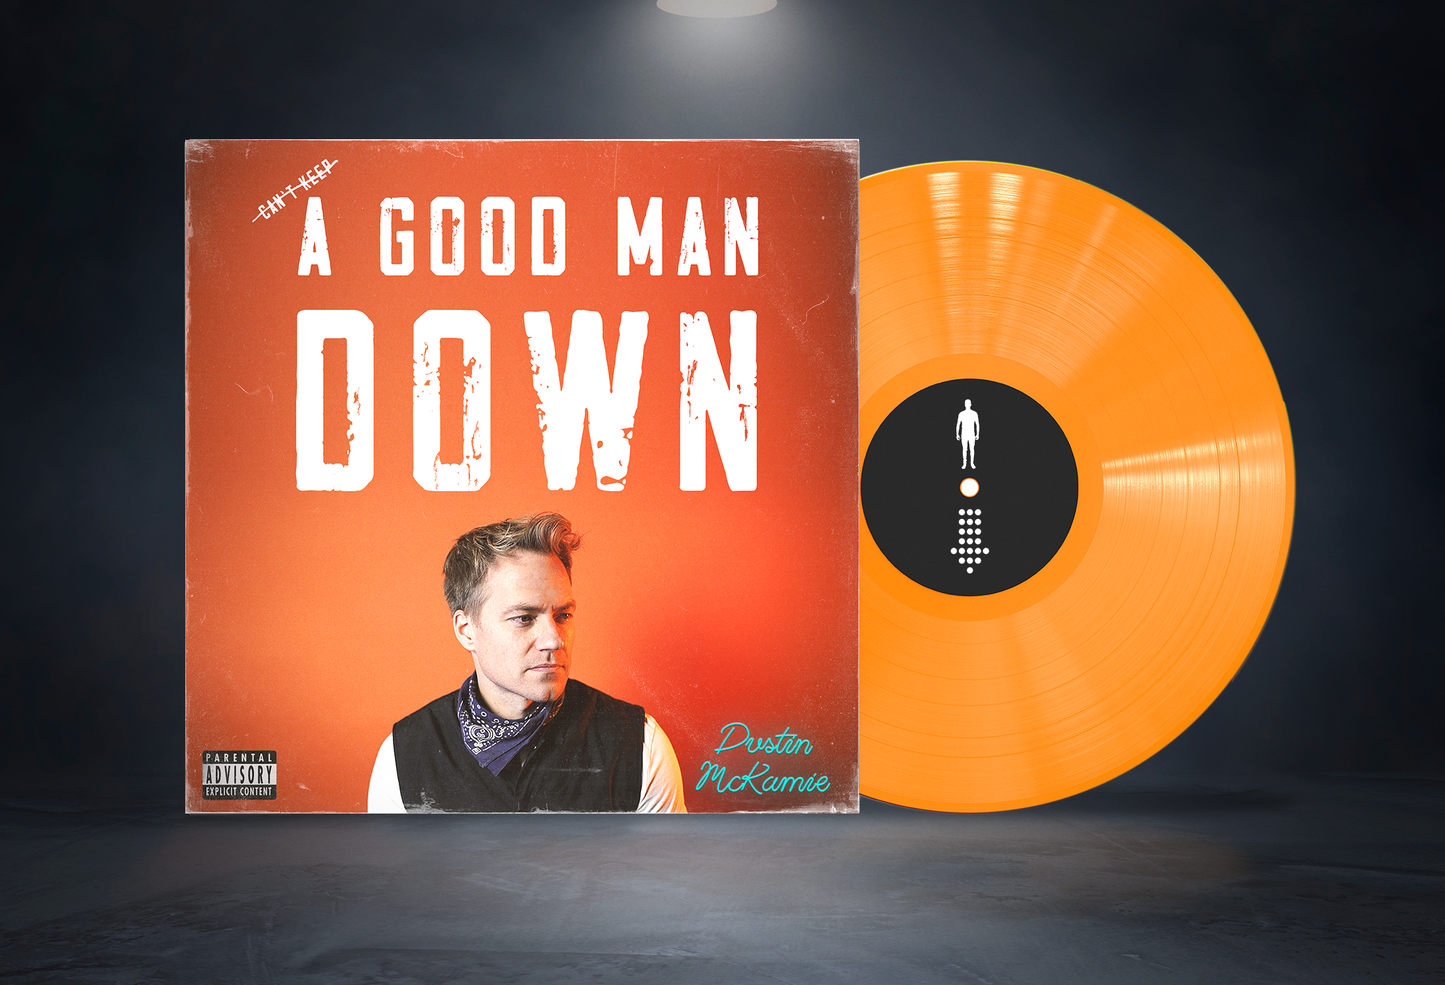 A Good Man Down (vinyl) ***SOLD OUT!***